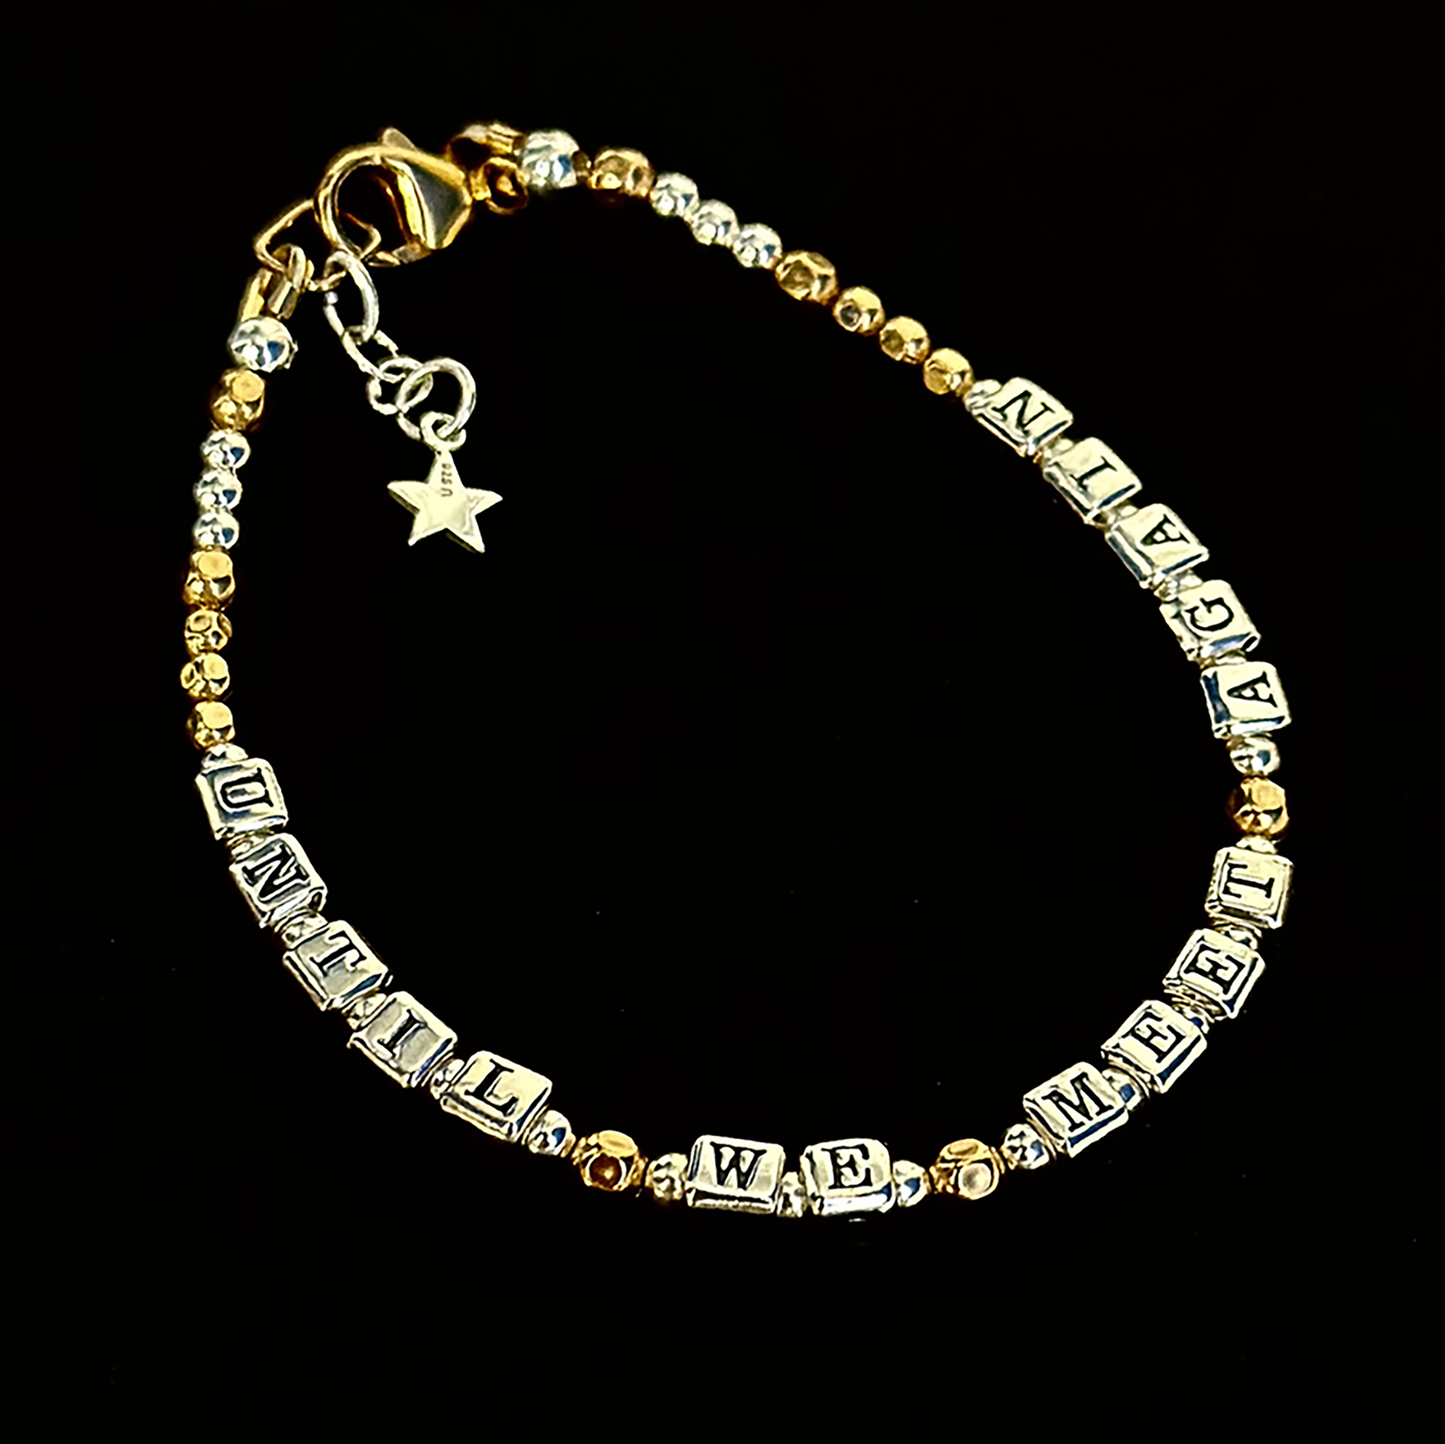 Sympathy or Grief Gift Bracelet says "Until We Meet Again" in sterling silver and gold, shown on black background